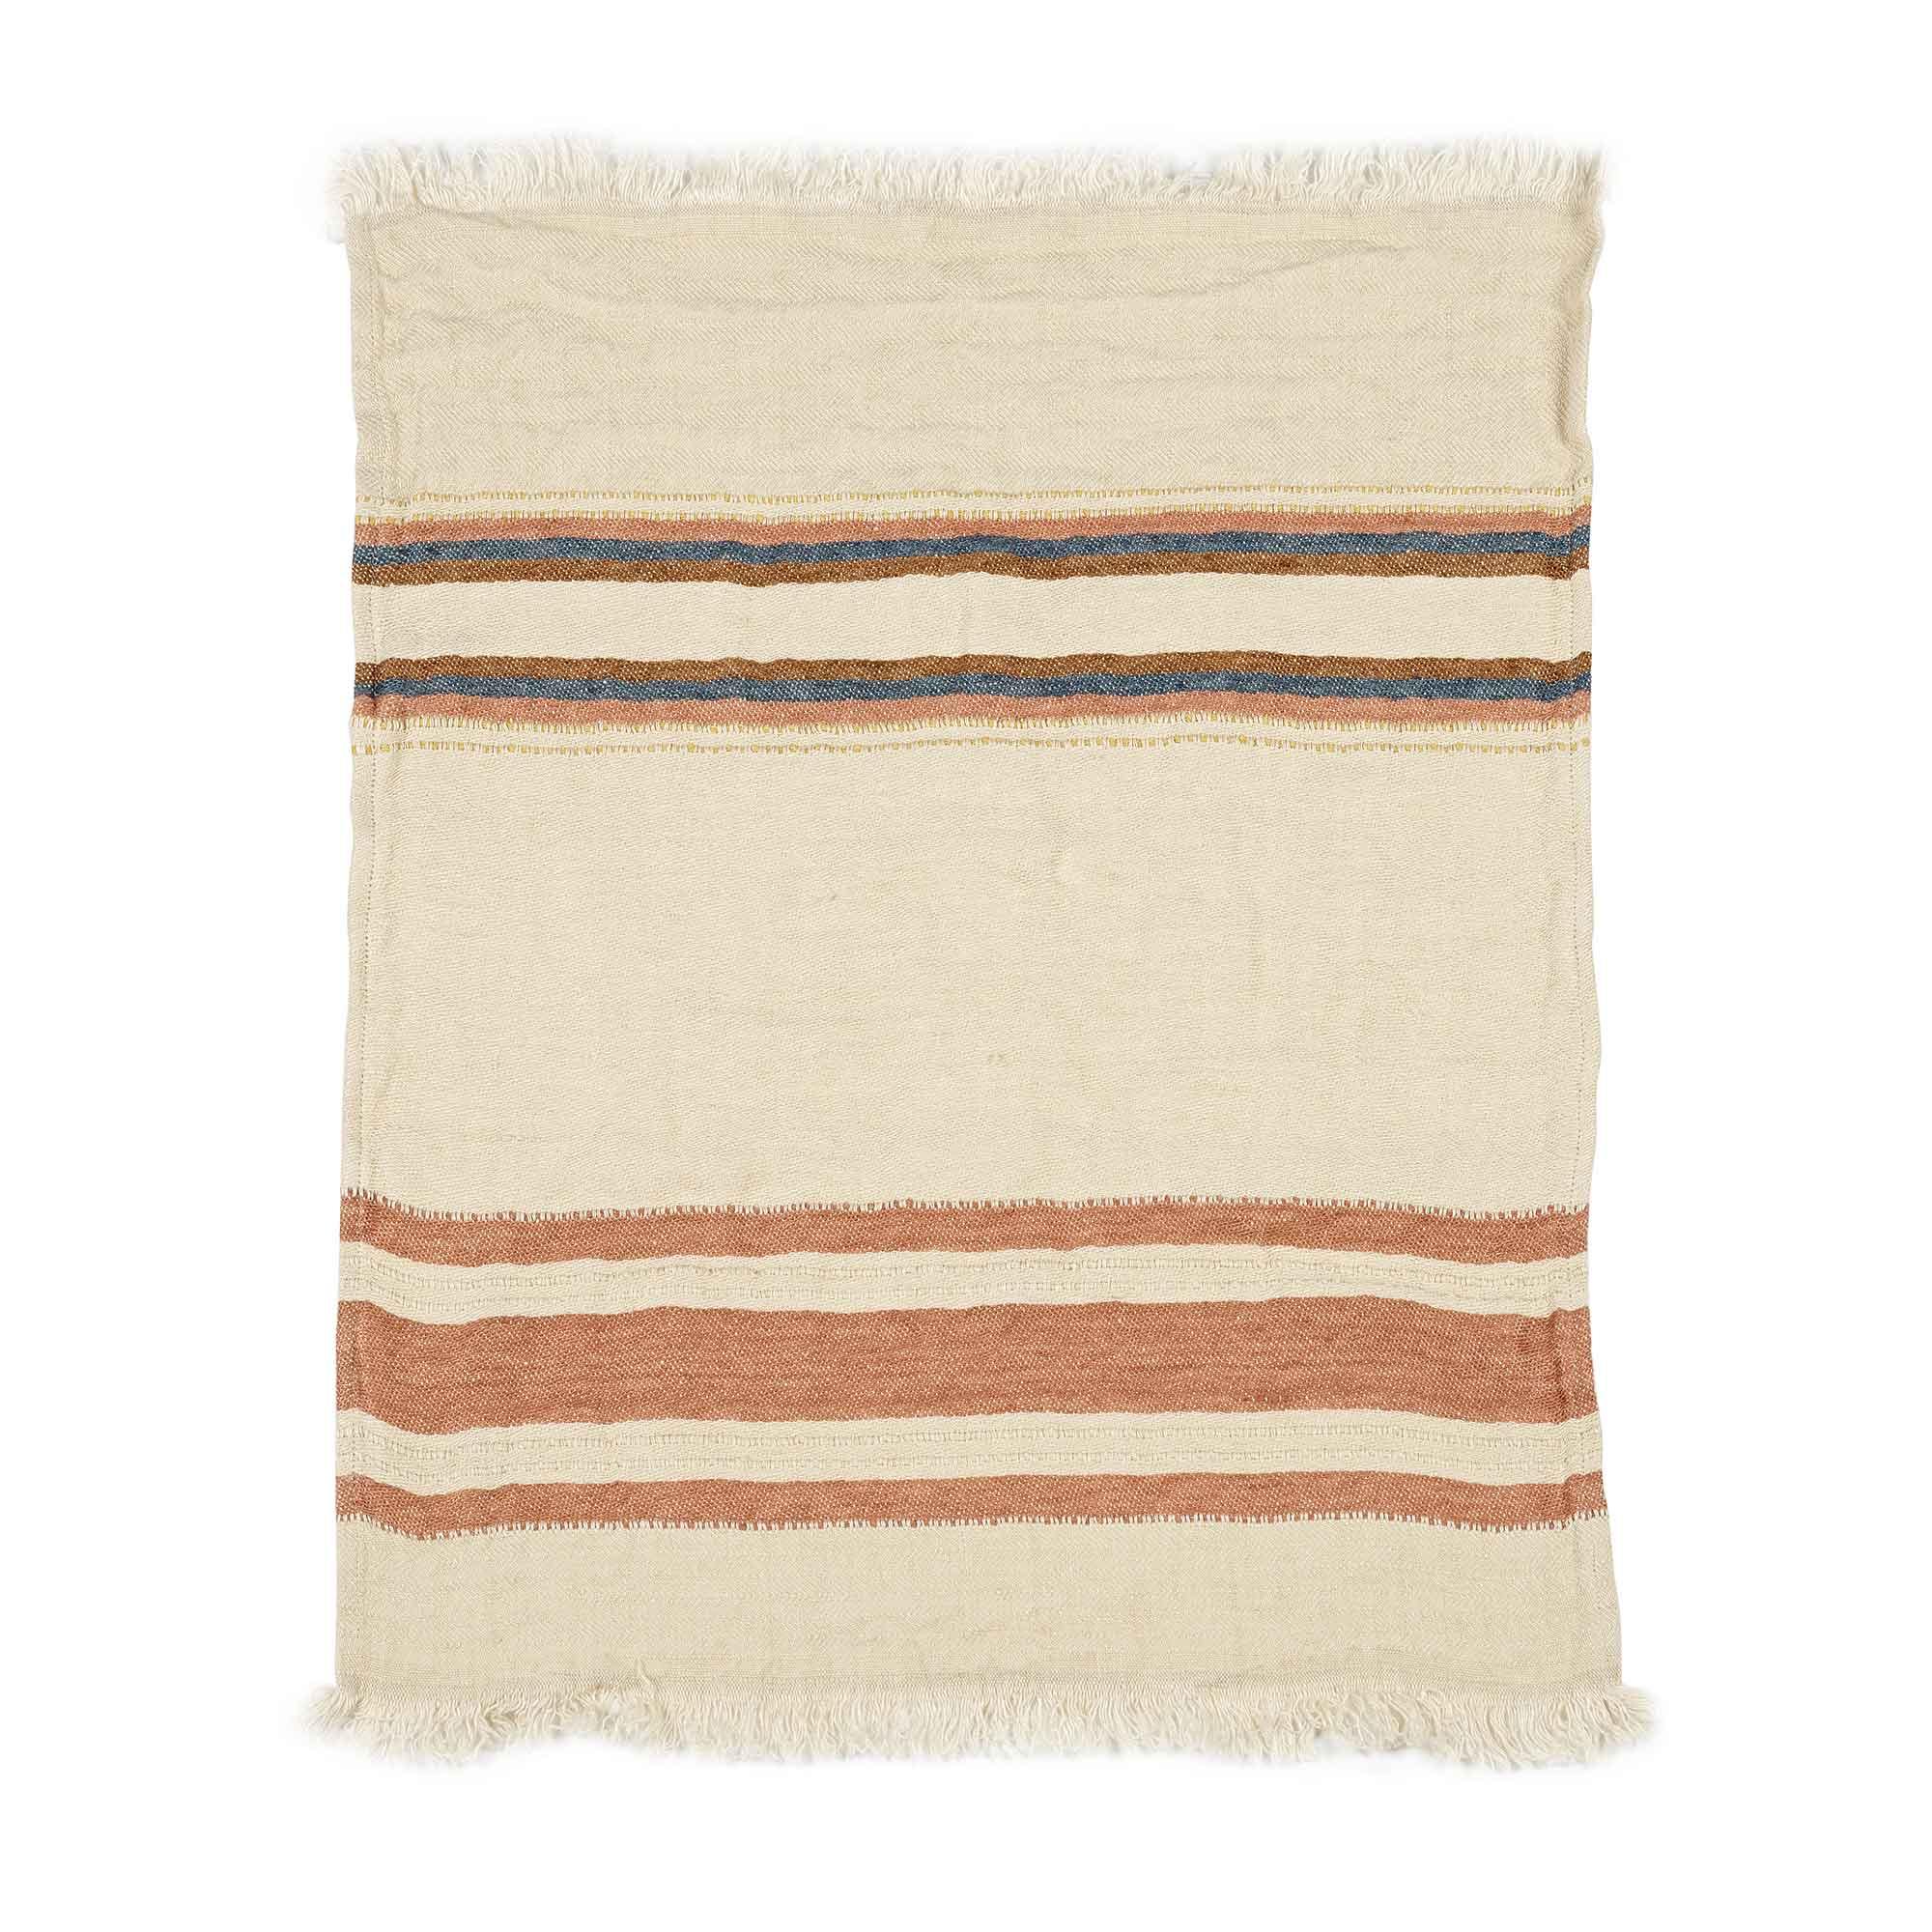 Belgian linen fouta throw blanket flat lay product shot in color Harlan by Libeco for South Hous.